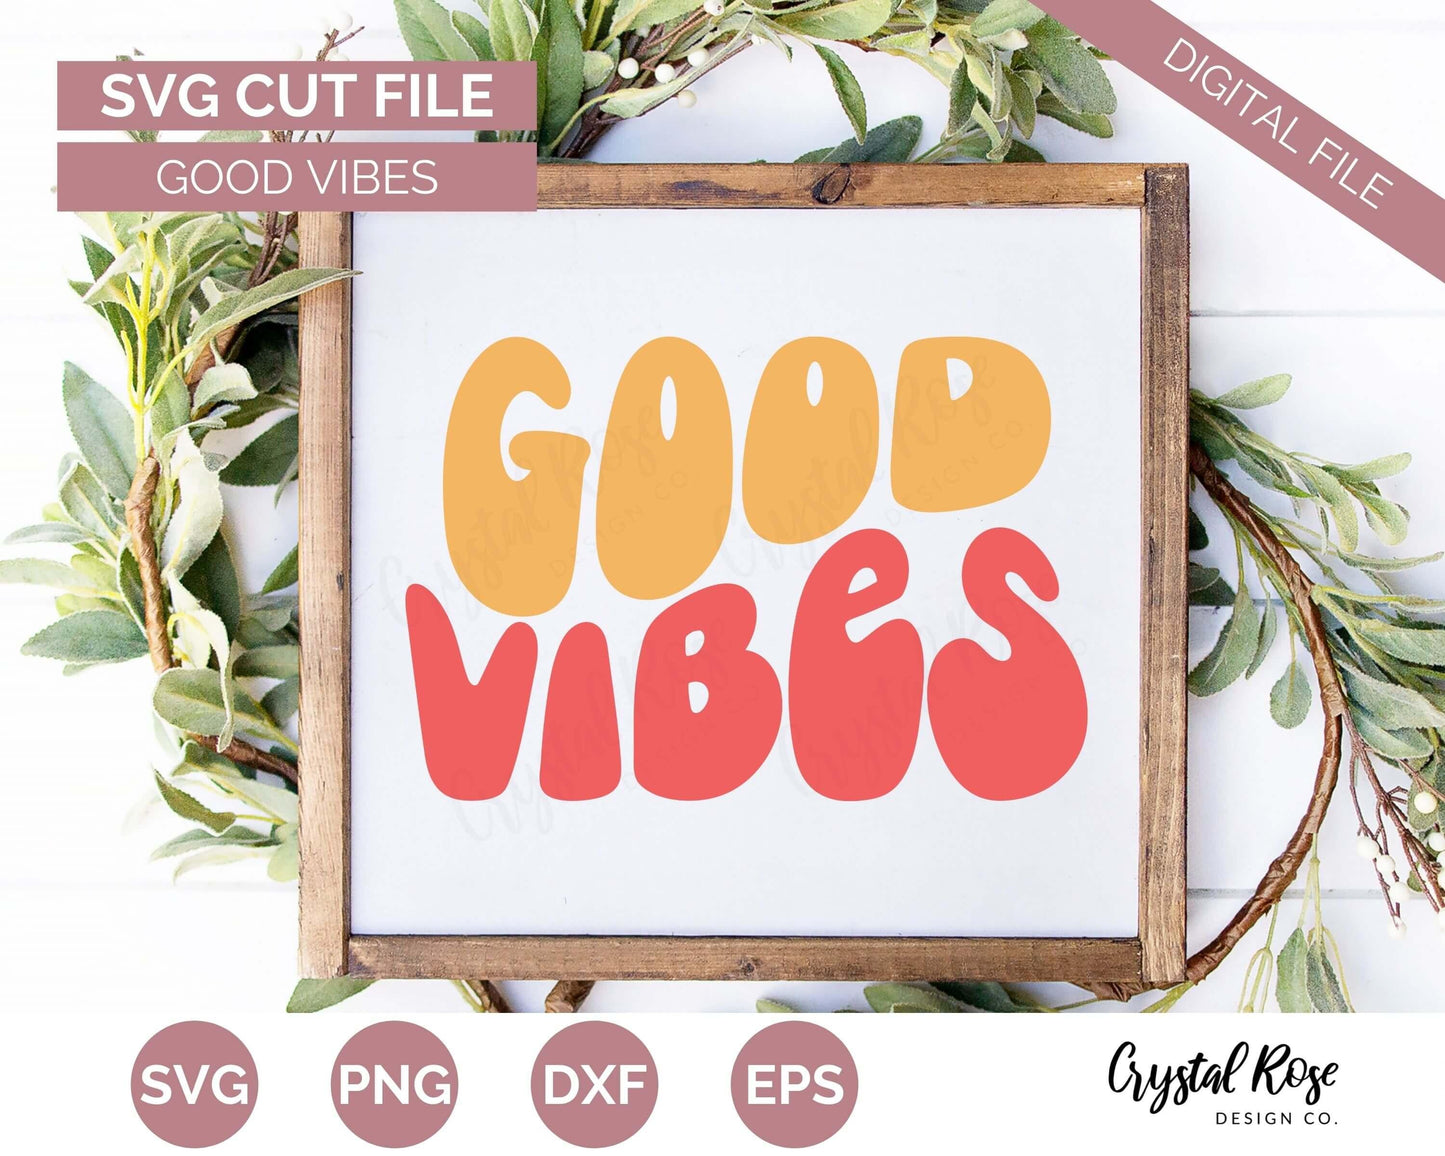 Retro Good Vibes SVG, Inspirational SVG, Digital Download, Cricut, Silhouette, Glowforge (includes svg/png/dxf/eps)